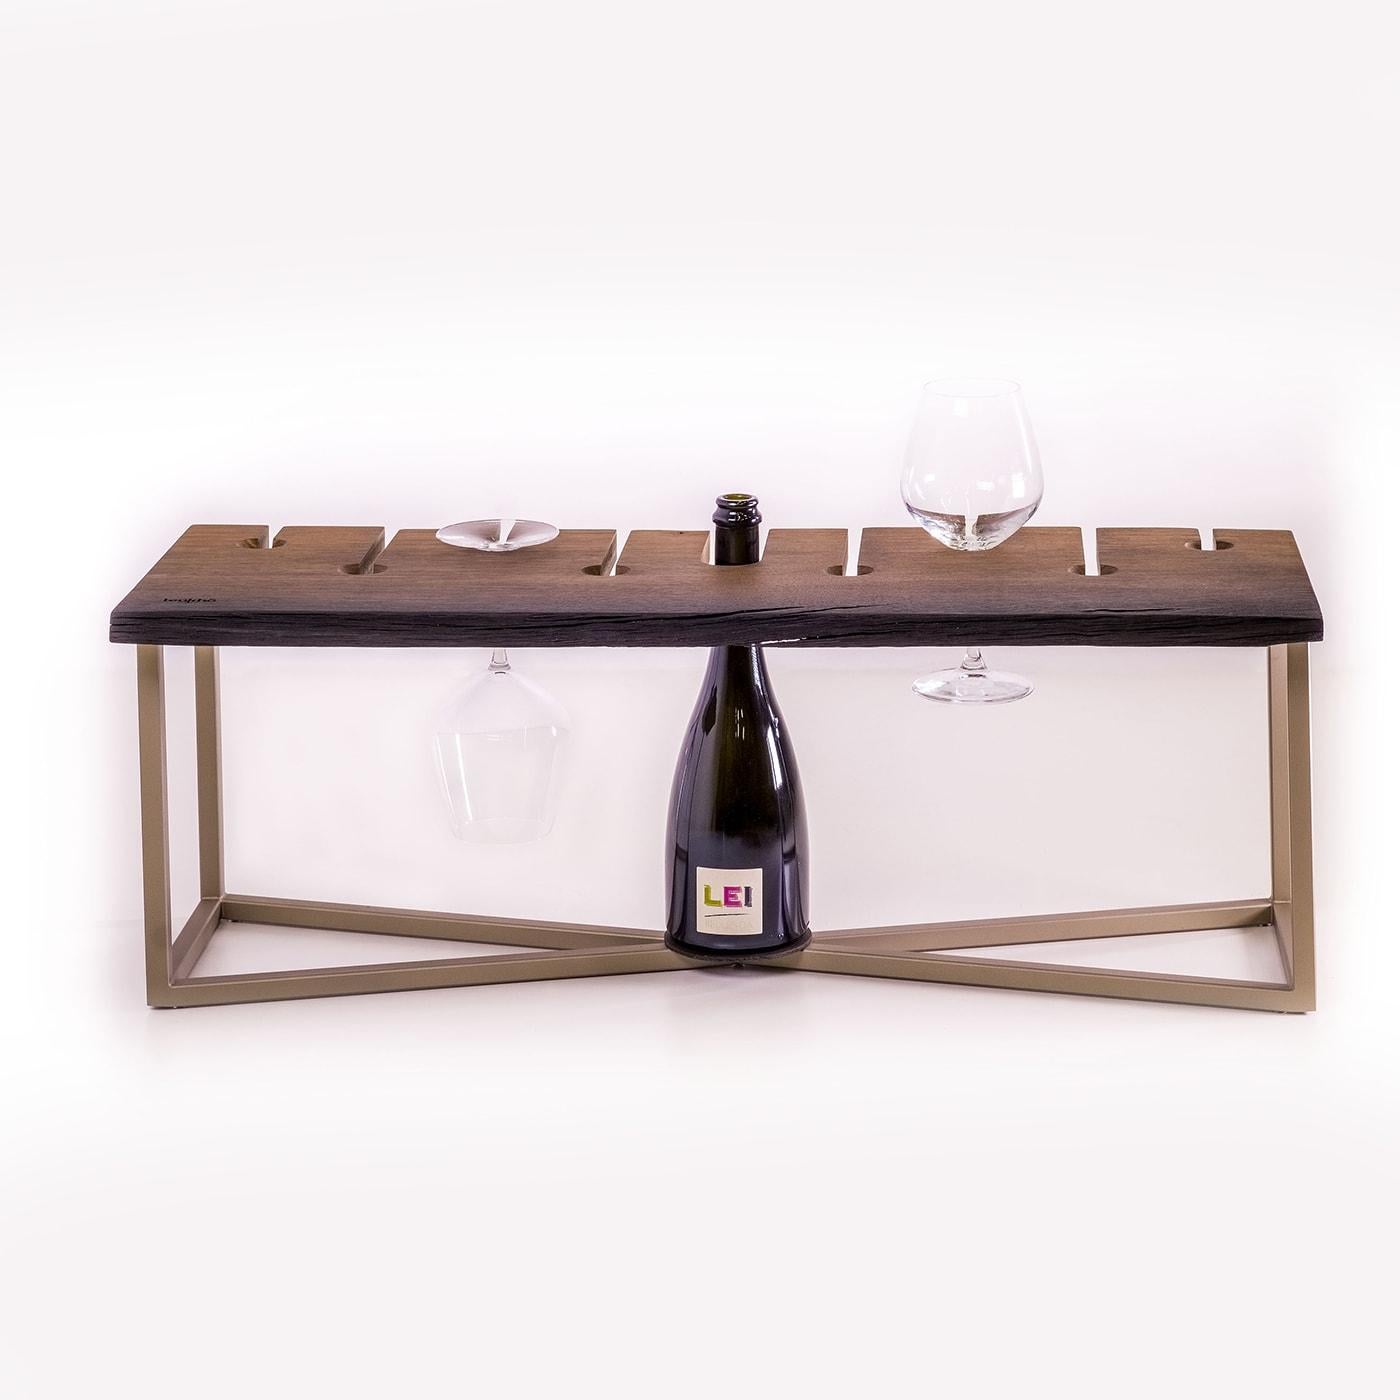 An elegant tray with inserts for 1 bottle and 8 glasses. On the front side, a space for placing small tapas. The frame is in Champagne painted metal. Finished with transparent oil suitable for contact with food. Design: Luca Degano.